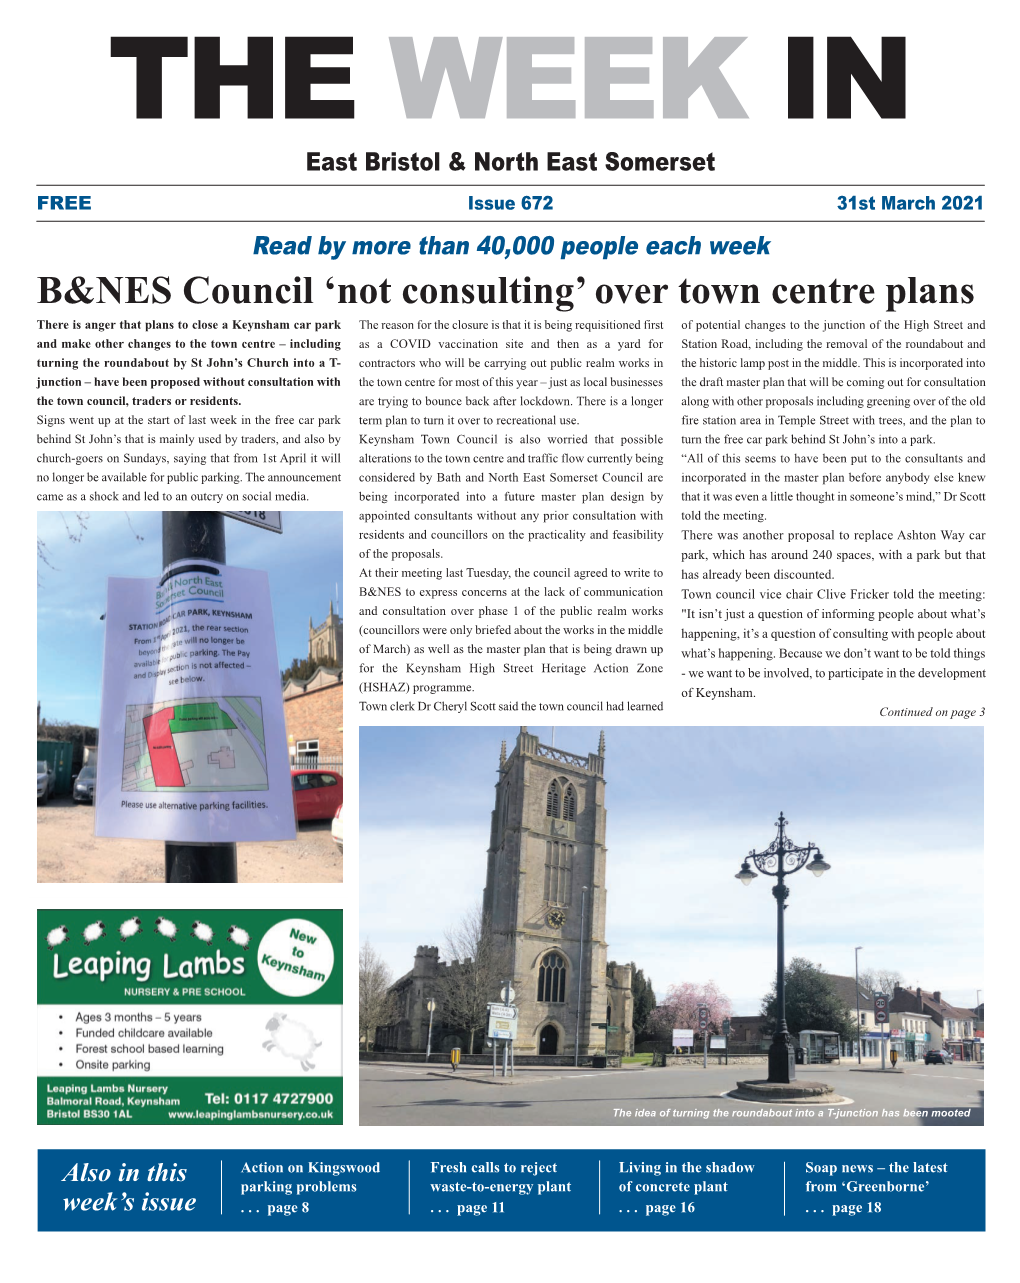 B&NES Council 'Not Consulting' Over Town Centre Plans